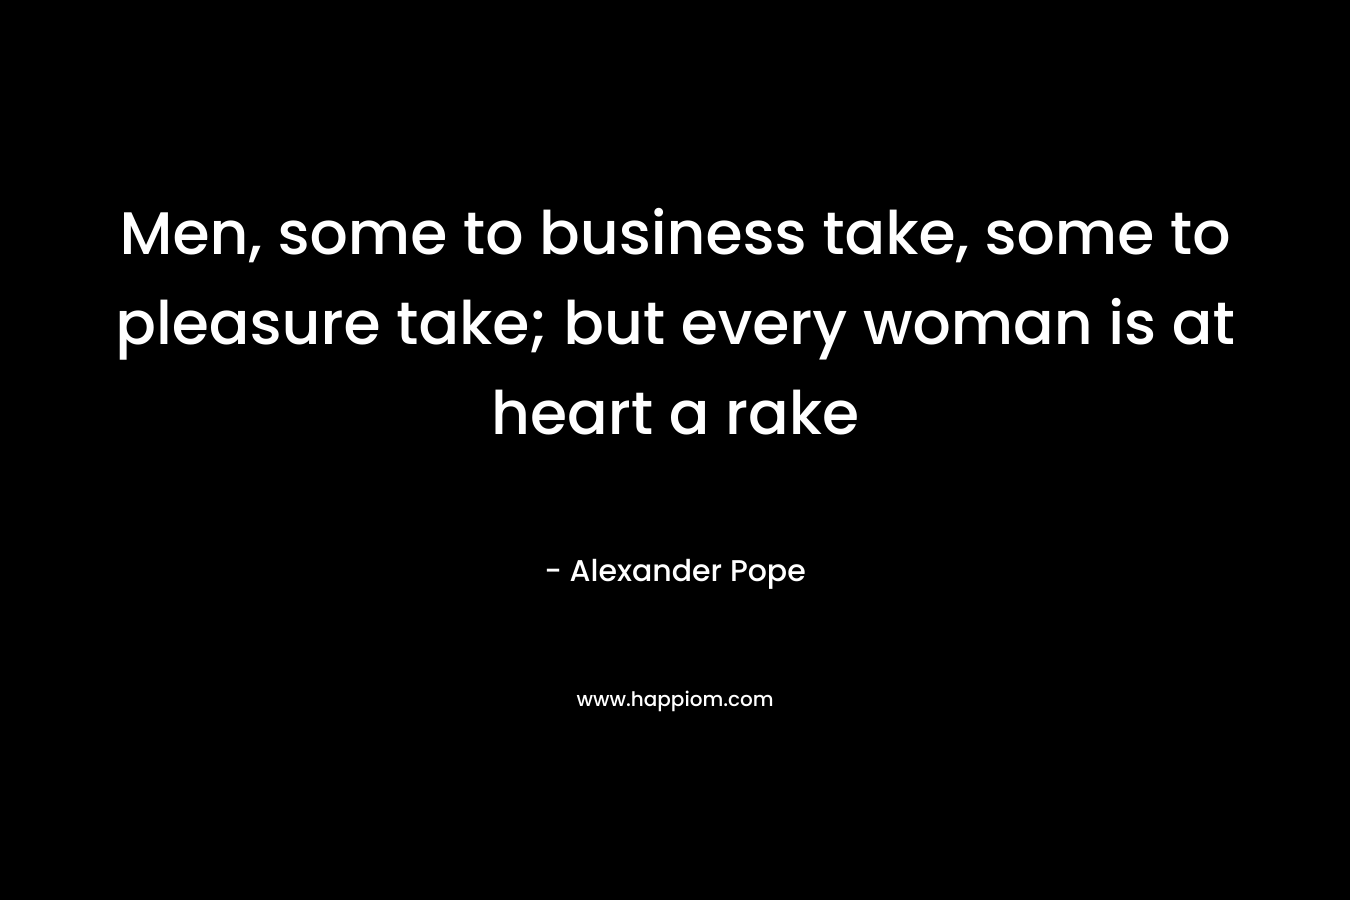 Men, some to business take, some to pleasure take; but every woman is at heart a rake